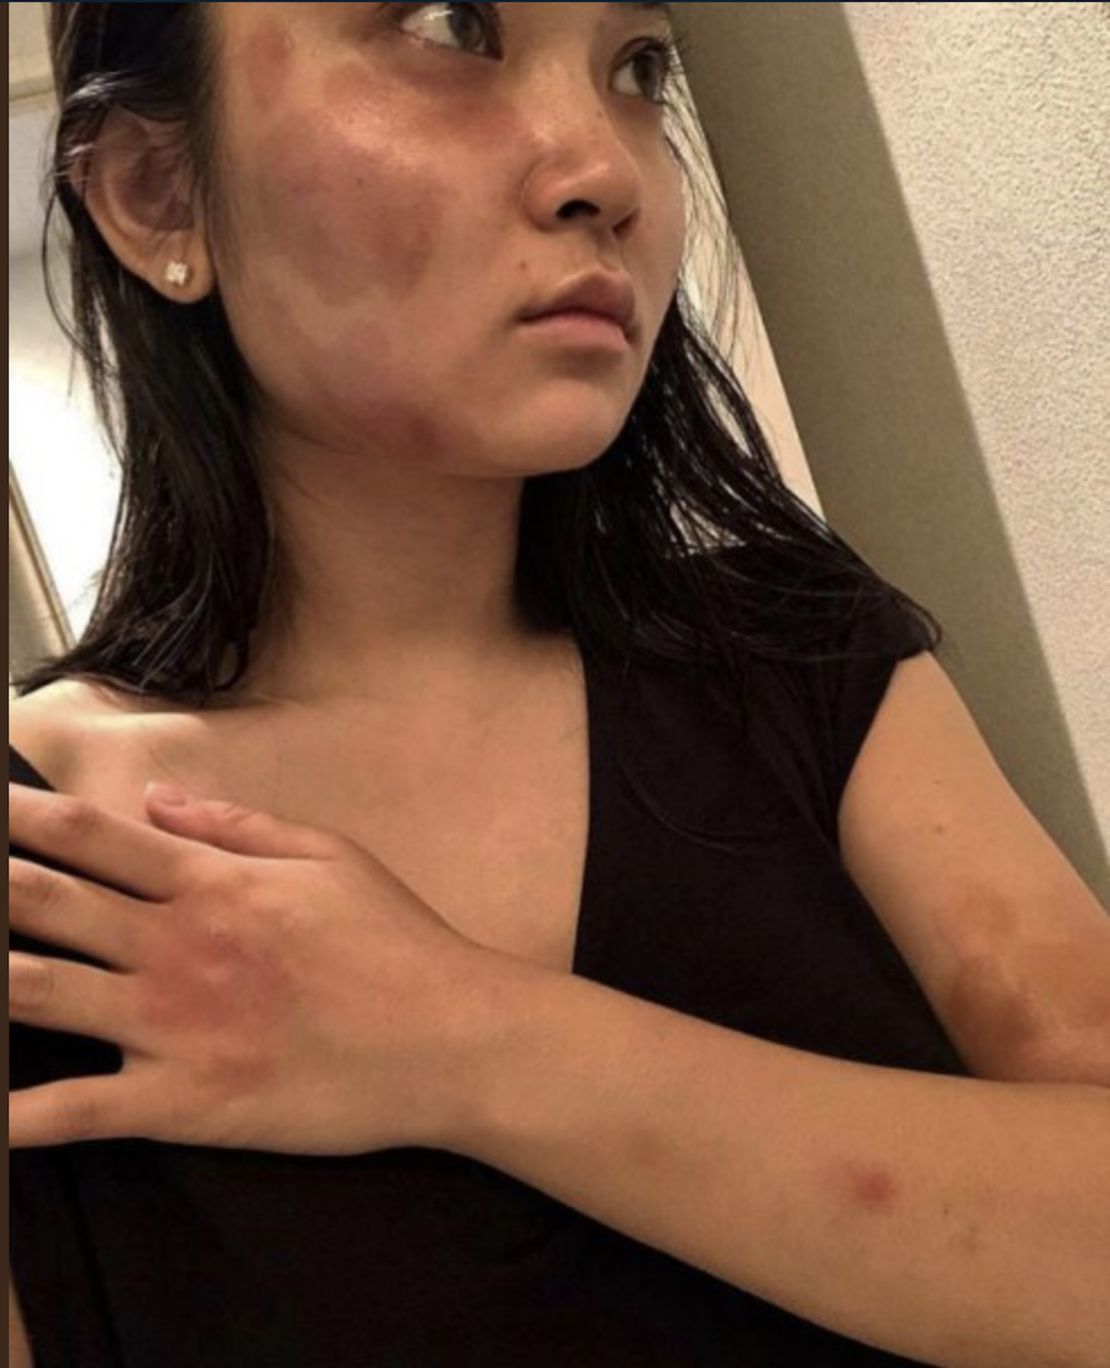 An image from Haruka Nakaura's Instagram account showing bruises on her face.